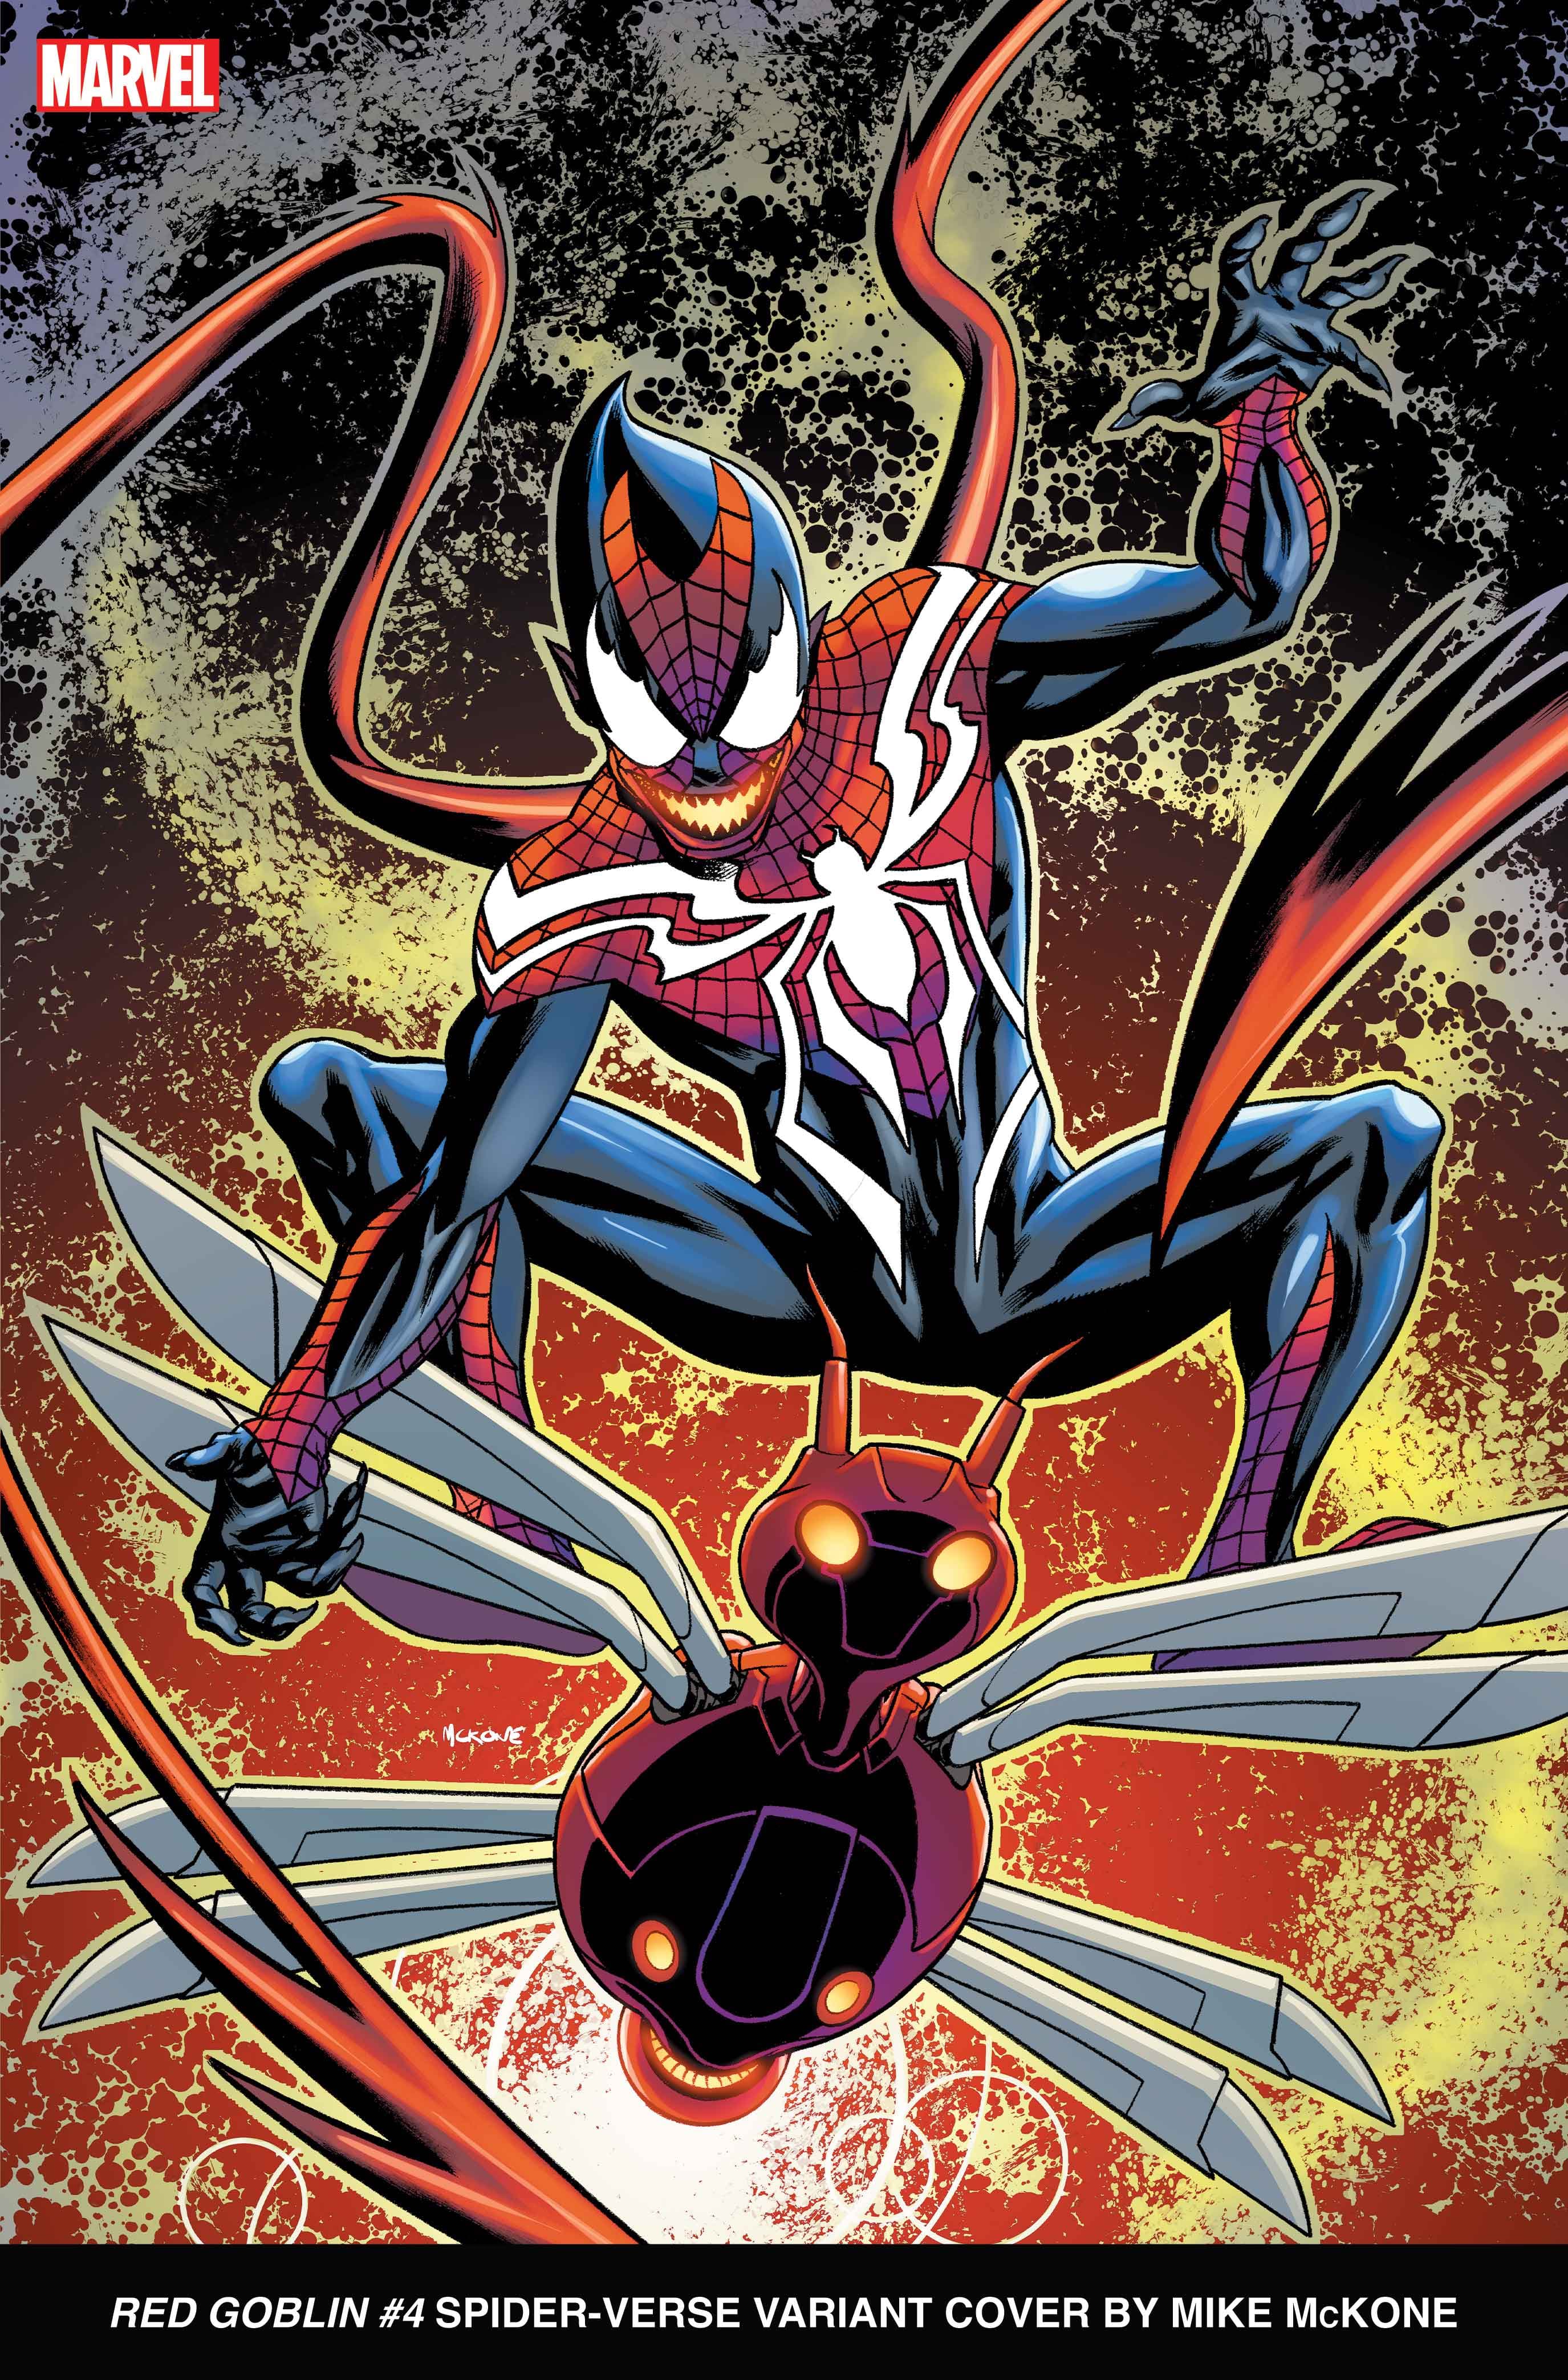 RED GOBLIN #4 Spider-Verse Variant Cover by Mike Mckone